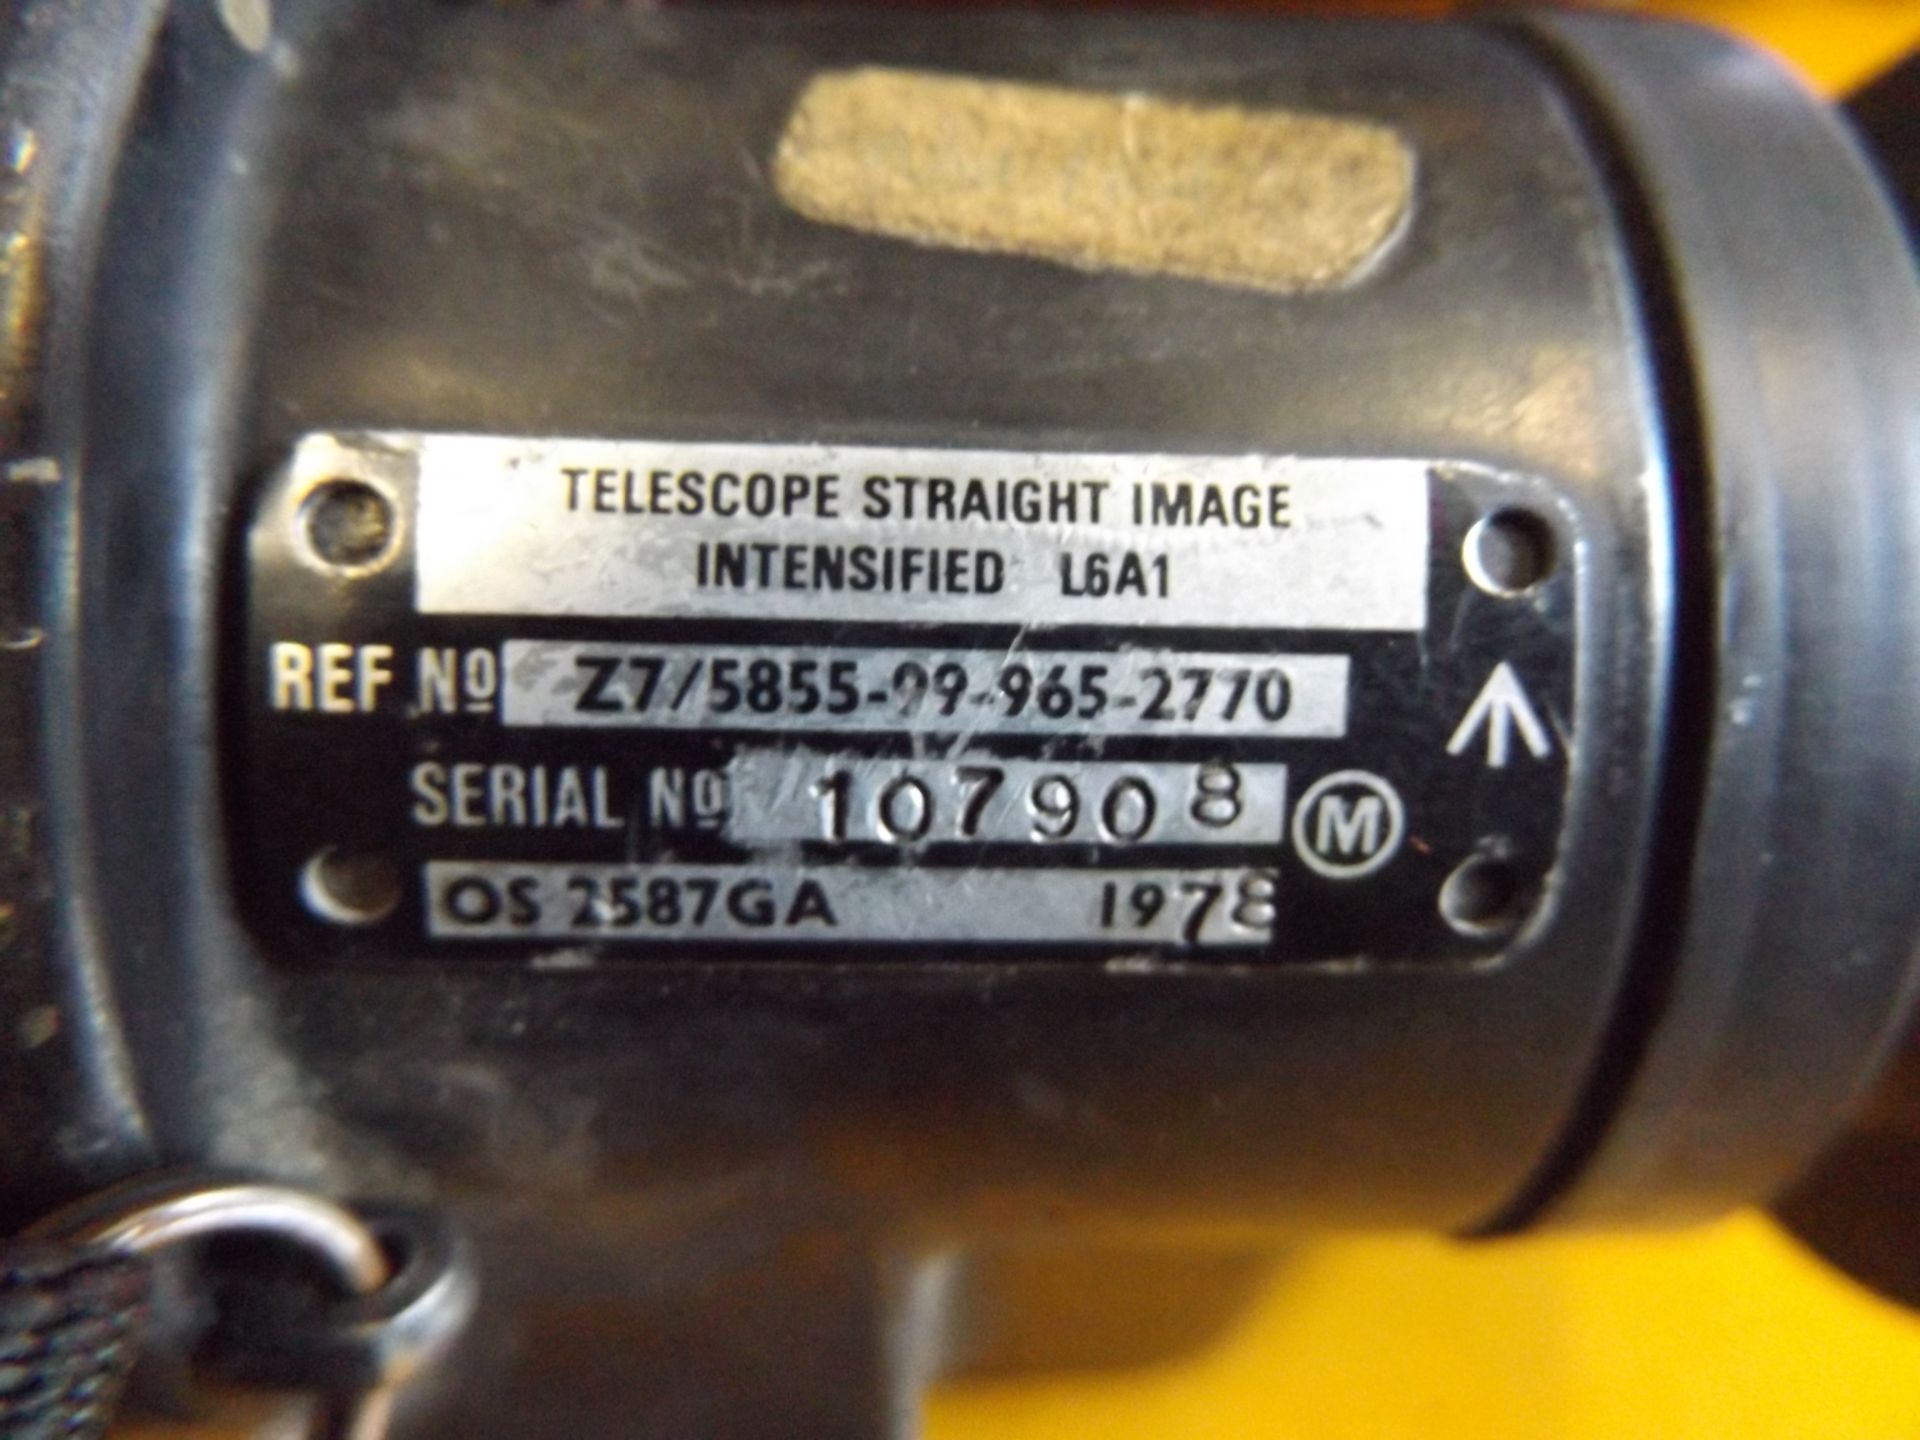 Telescope Straight Image Intensified L6A1 Scope - British Military Night Vision Pocket Scope - Image 7 of 9